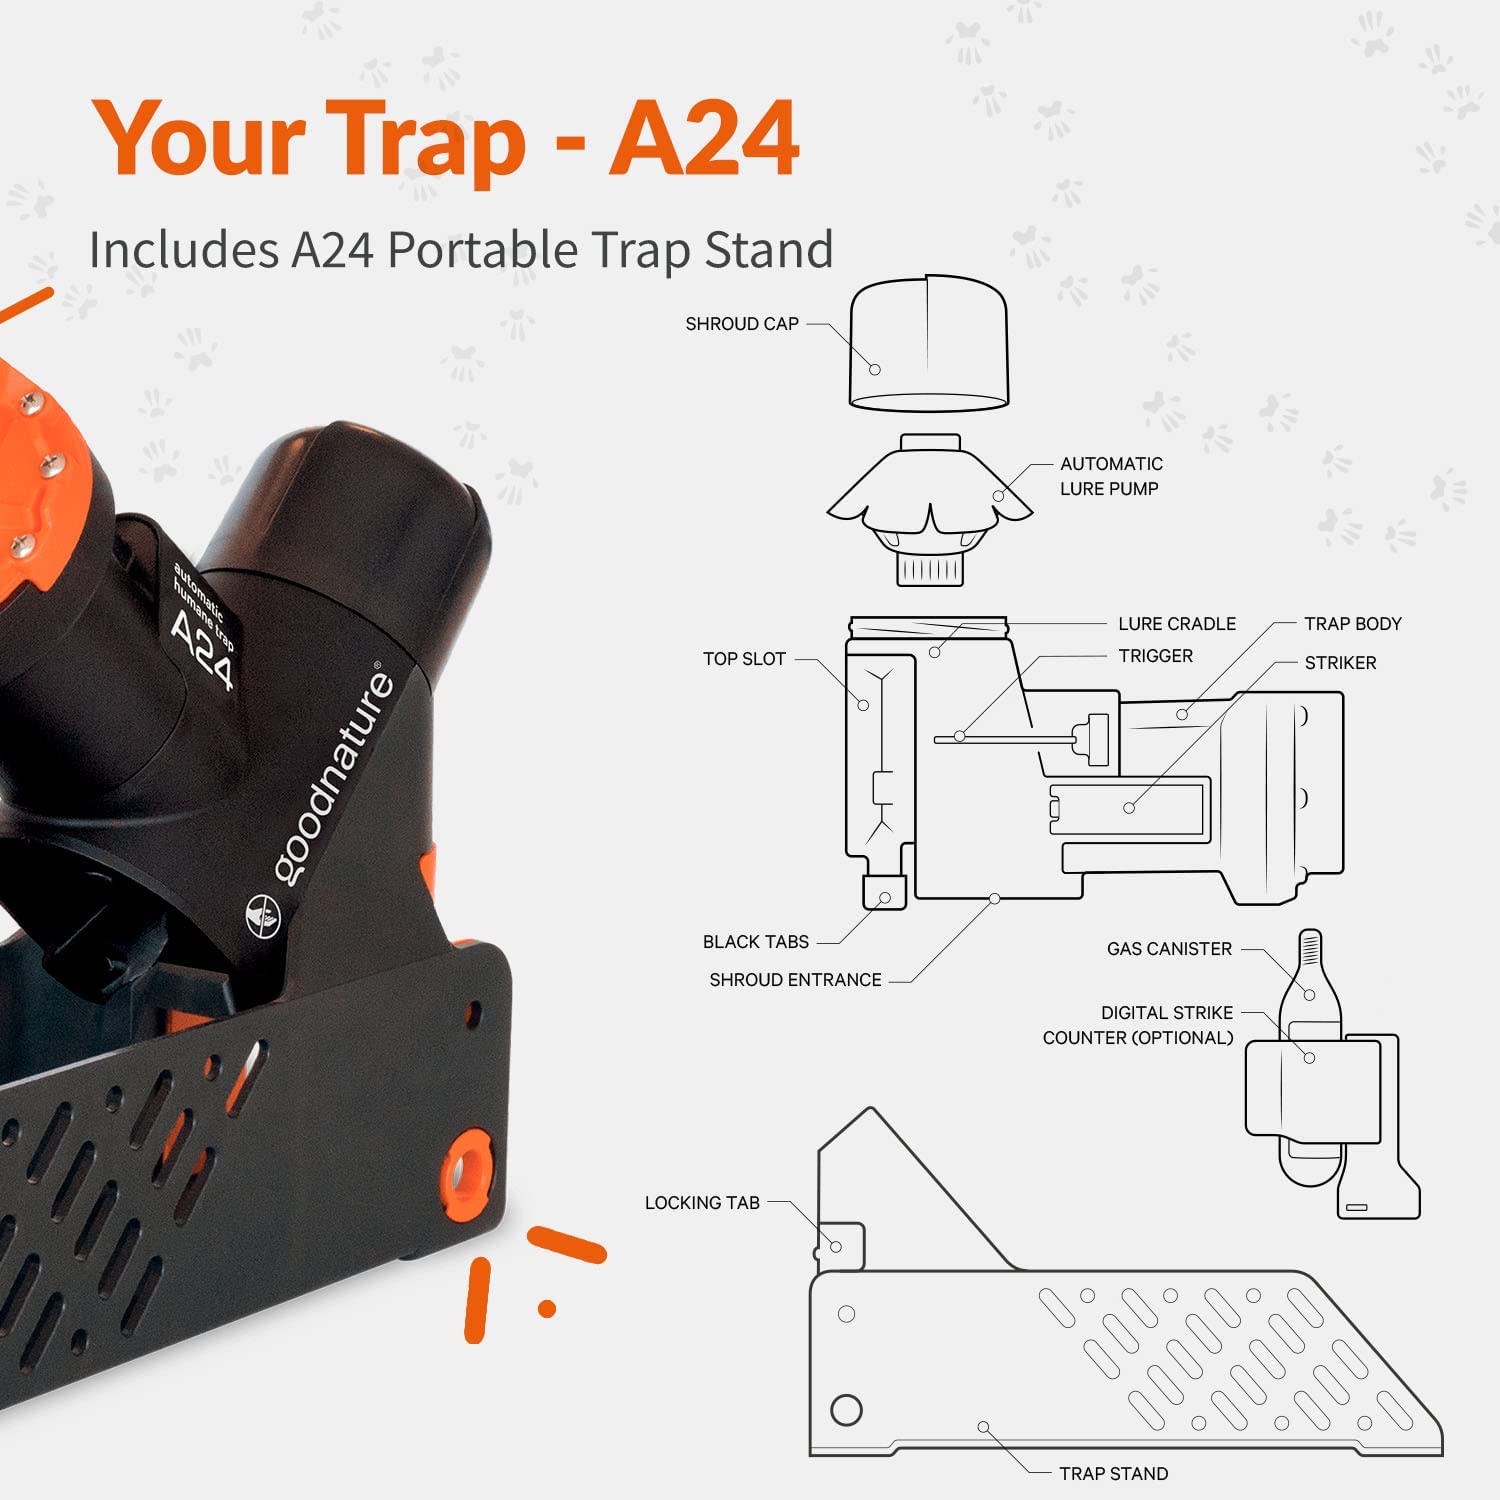 Time to try out the new rat trap, A24 by goodnature some good reviews some  not so we shall see what we can catch very excited. Was going to put in coop